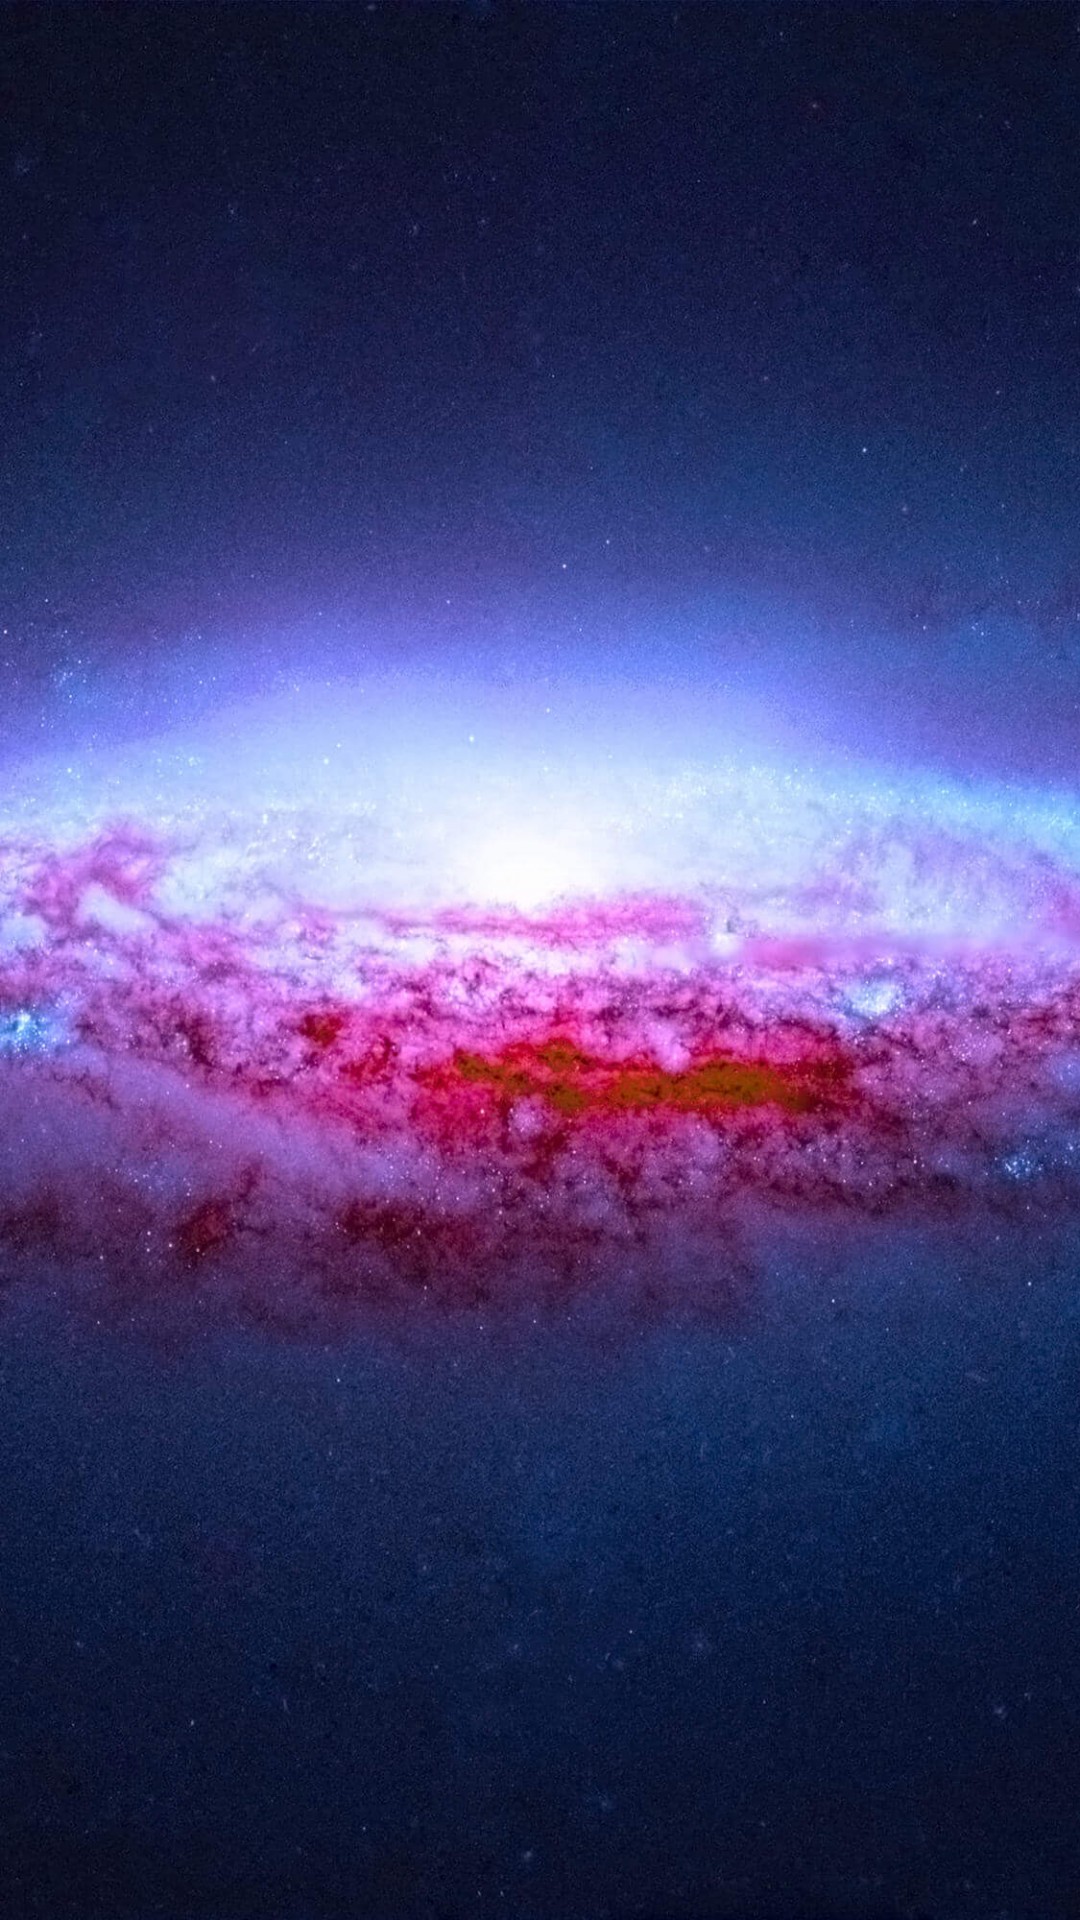 Ngc Spiral Galaxy HD Wallpaper For S5